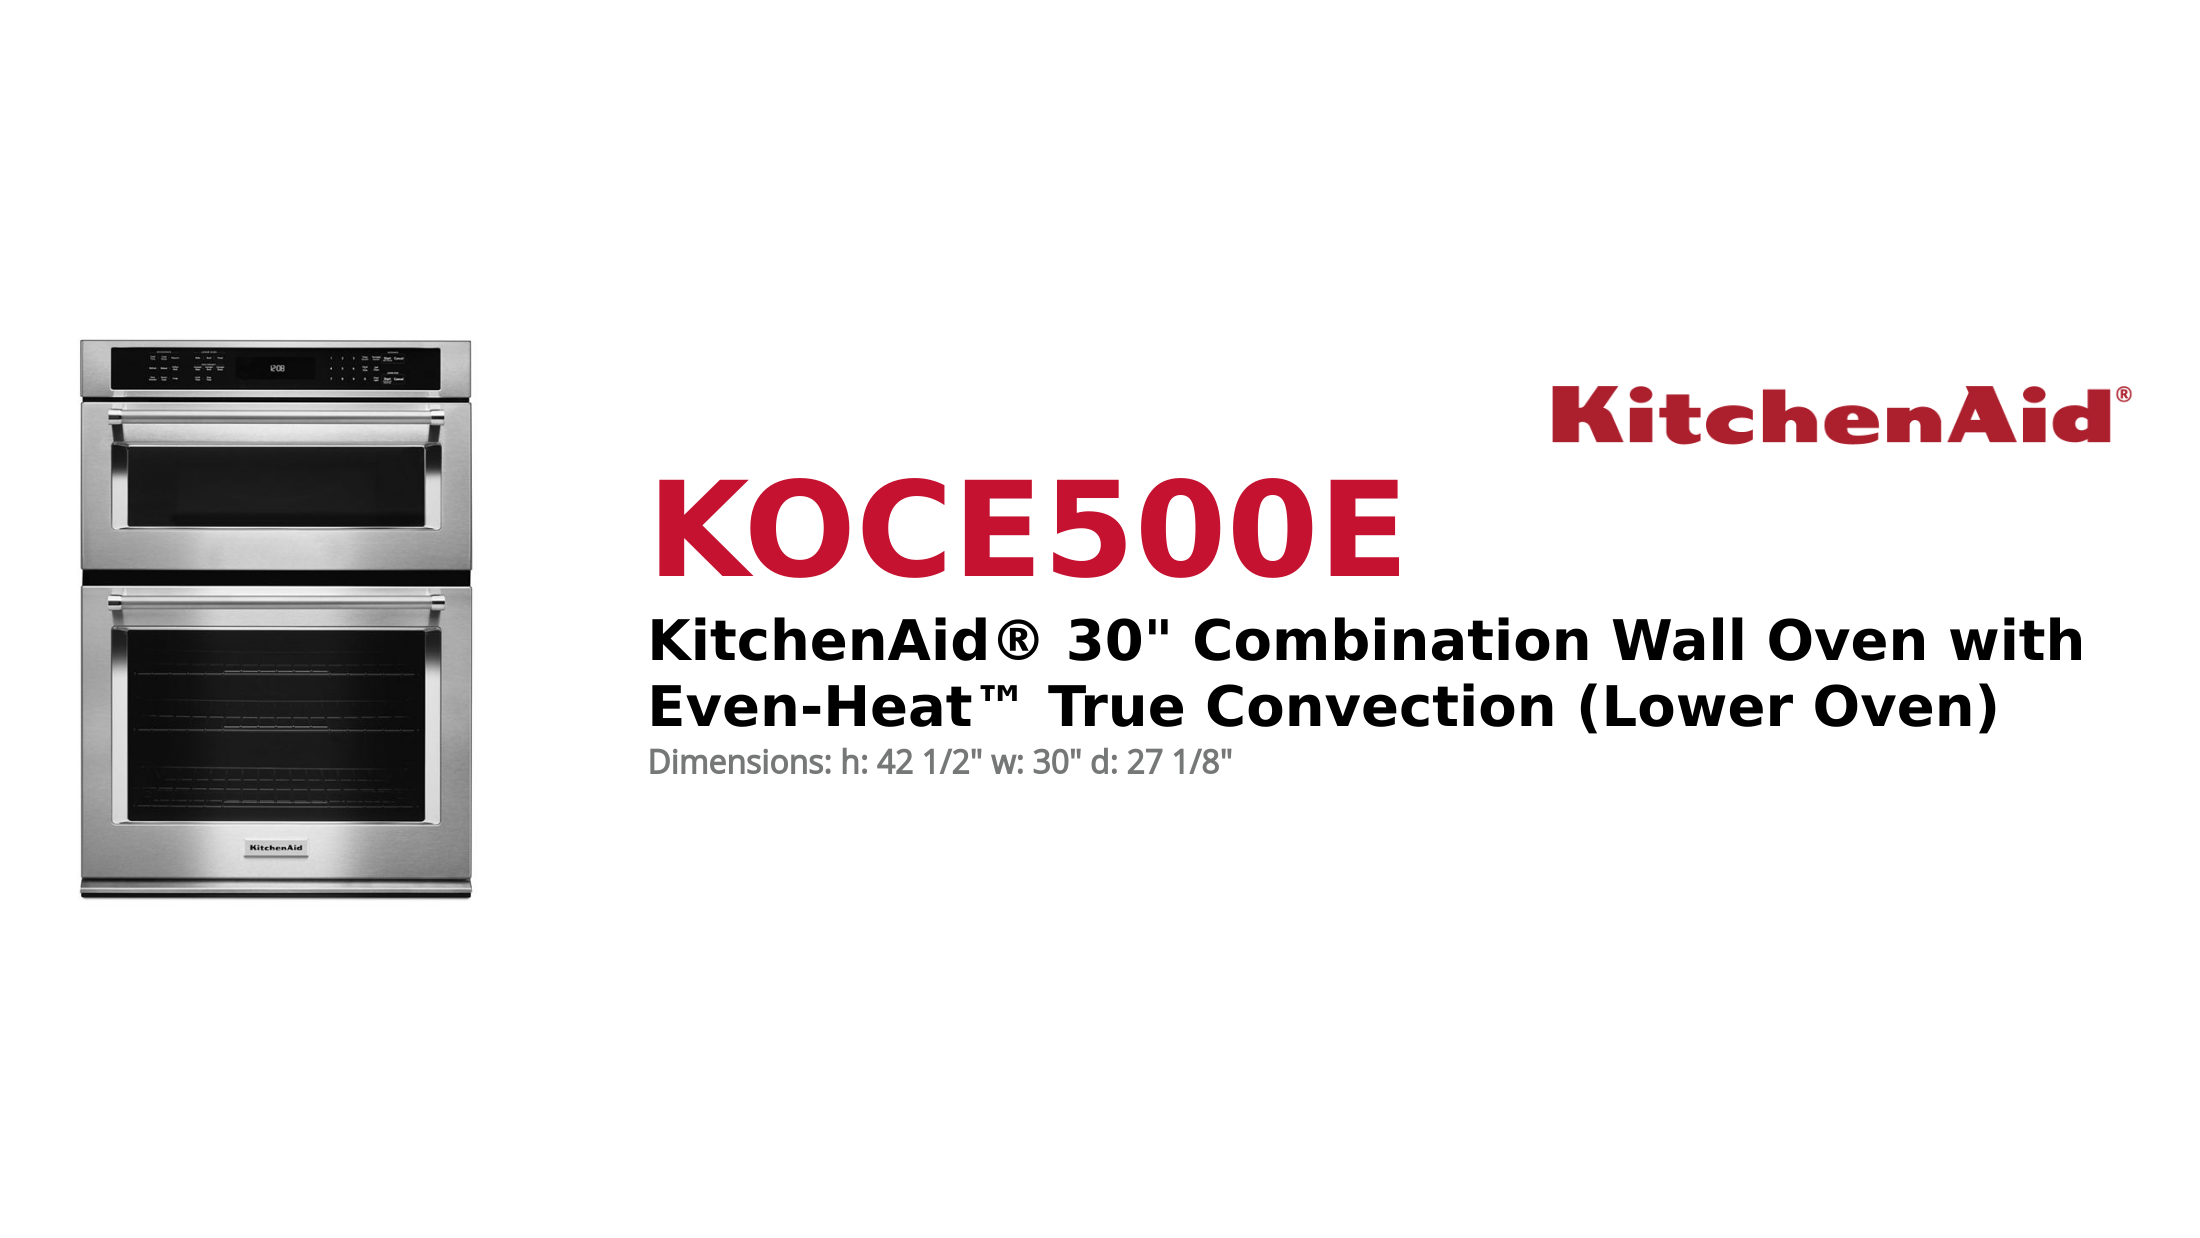 KitchenAid® 30 Combination Wall Oven with Even-Heat™ True Convection (Lower Oven)